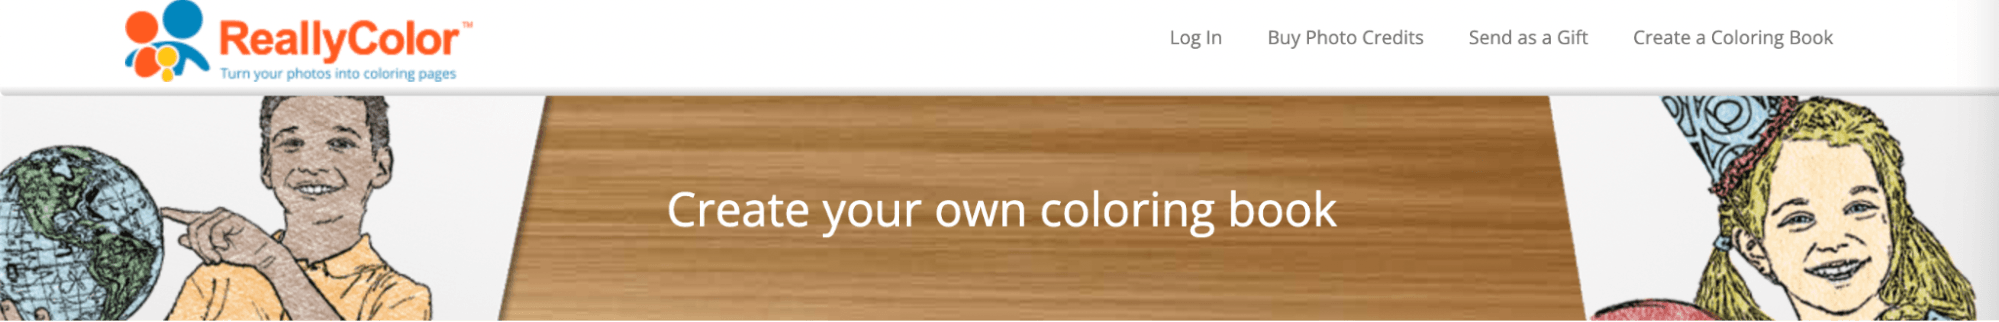 ReallyColor - Online Tool for Creating Custom Coloring Pages